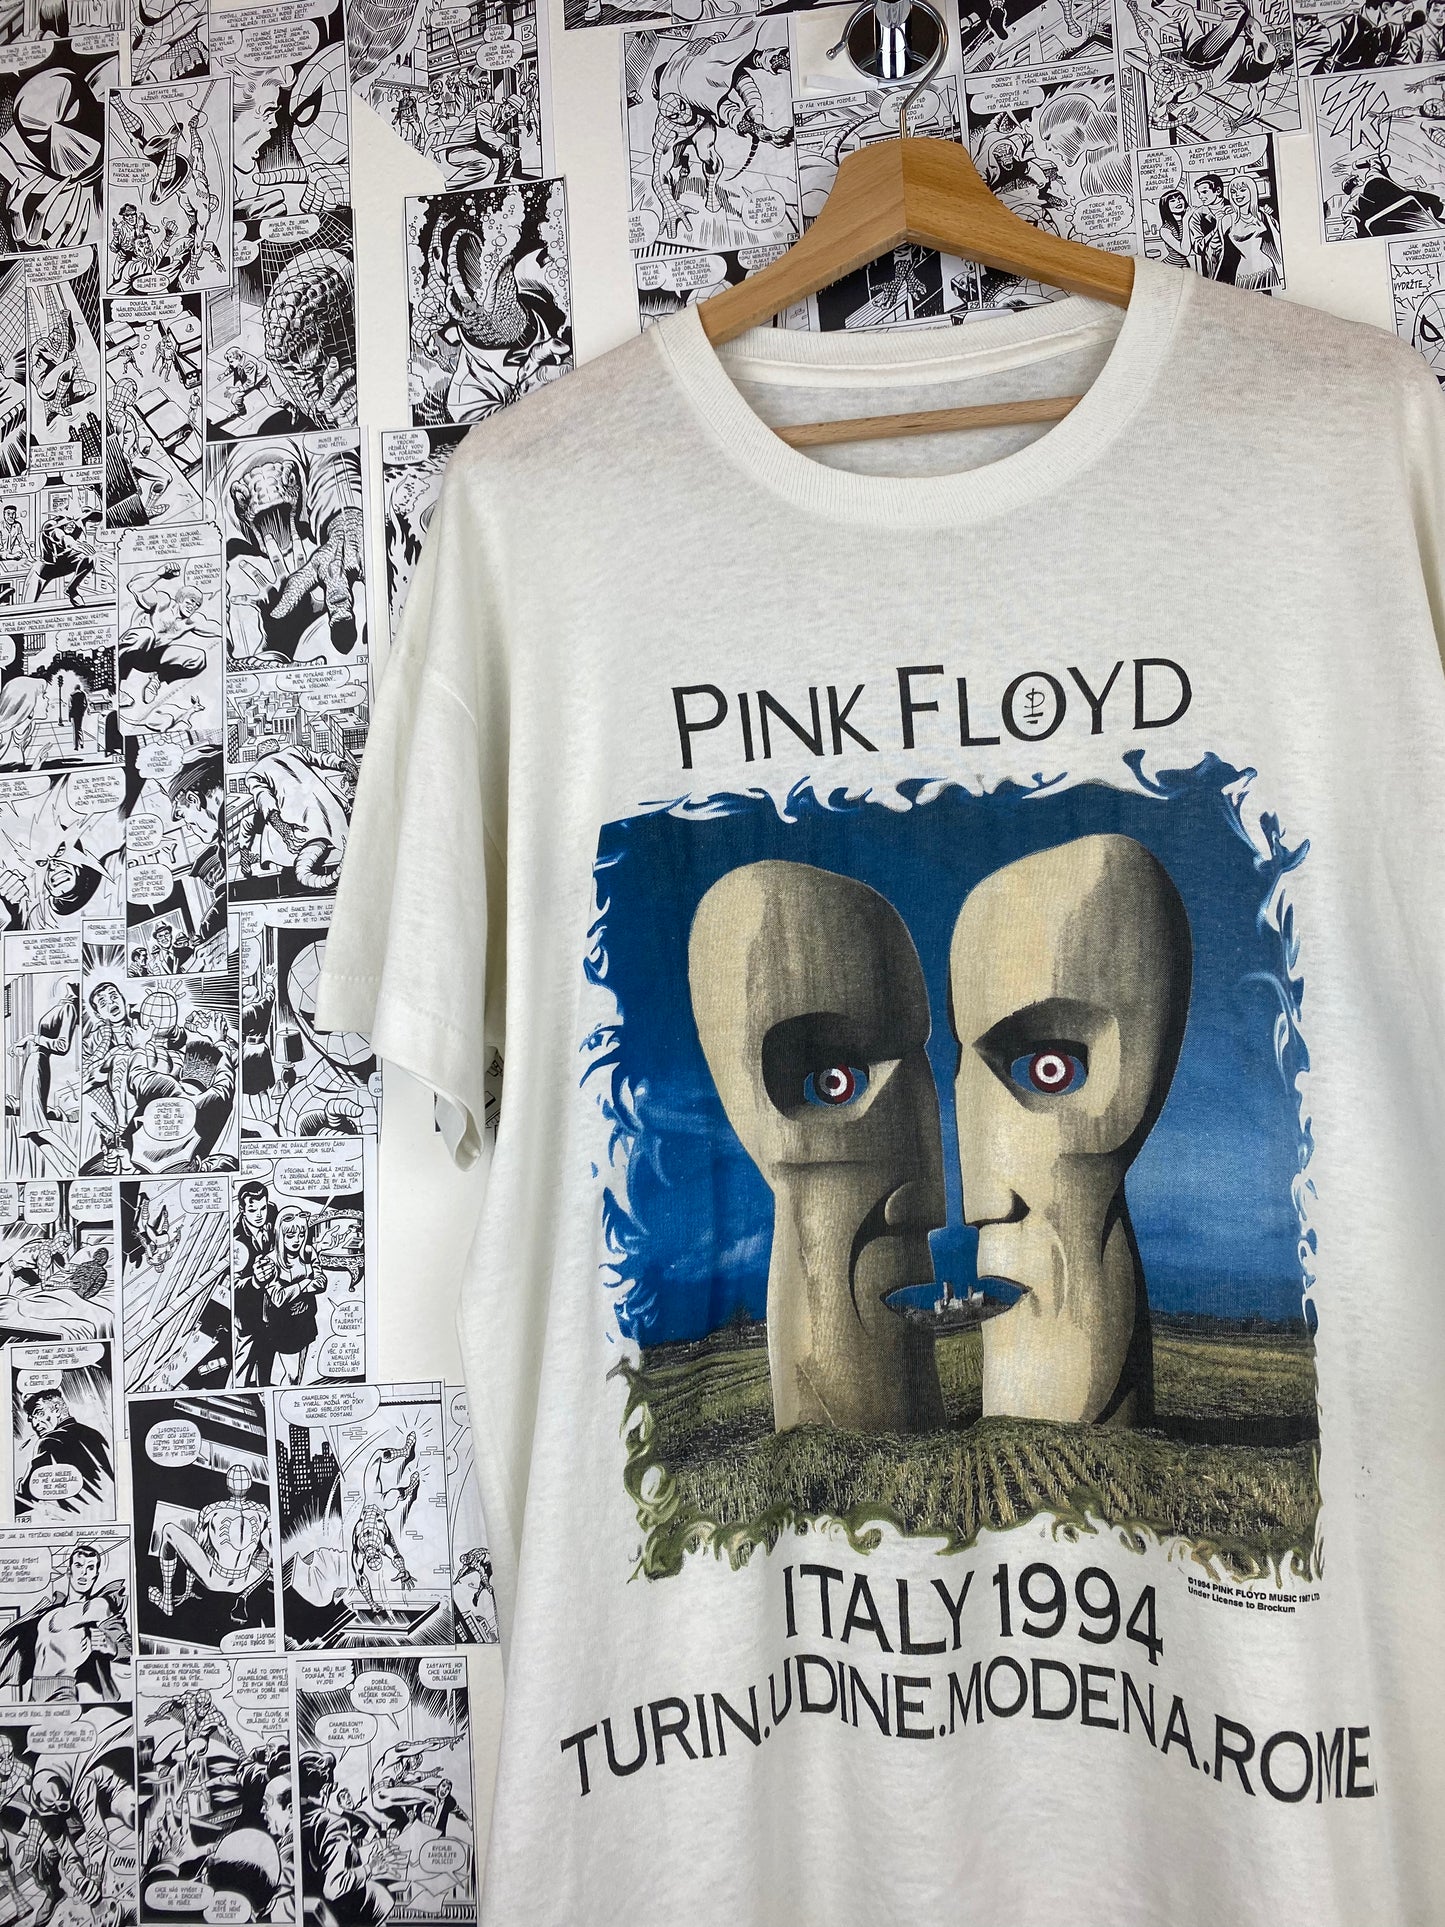 Vintage Pink Floyd “the Division Bell” 1994 T-shirt - size L